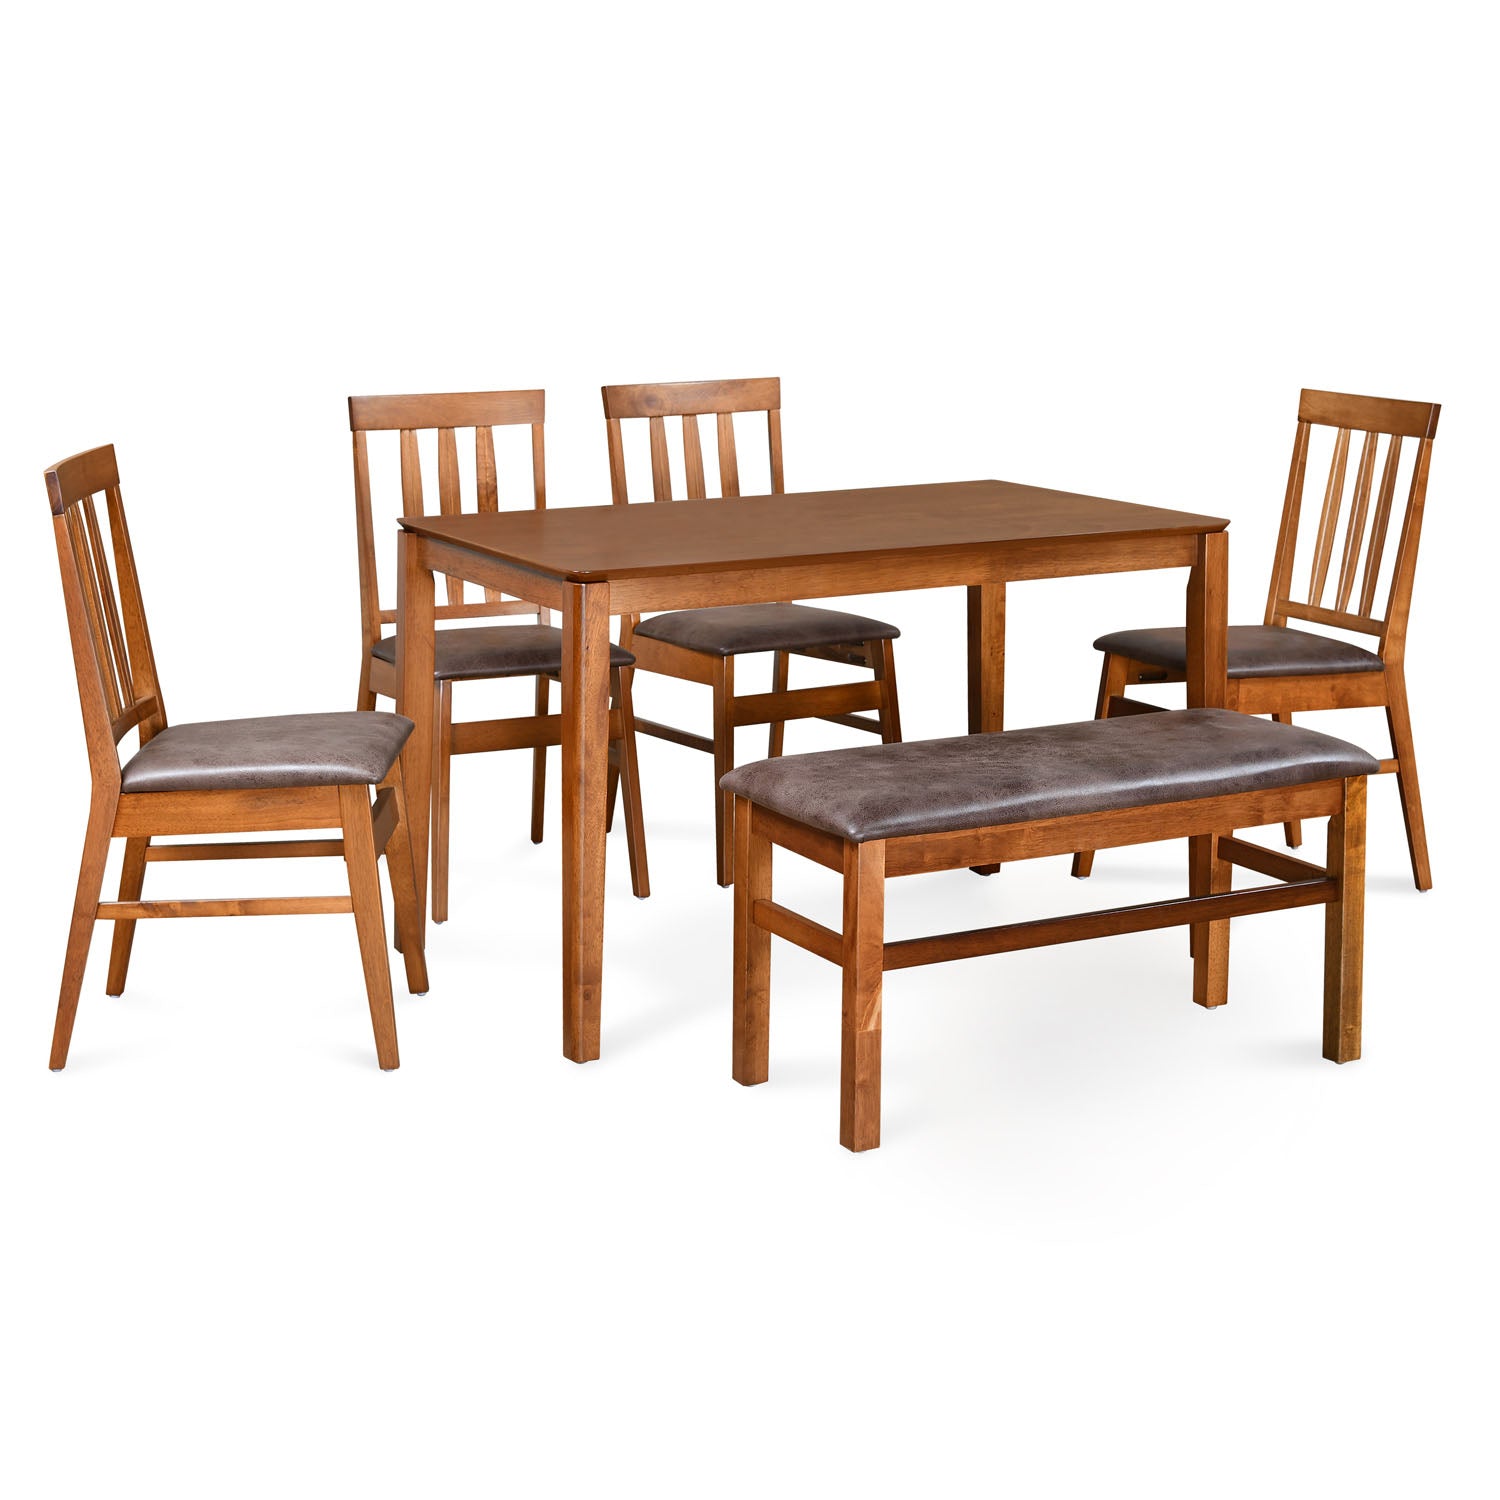 Leaf 6 Seater Dining Set With Bench (Walnut)